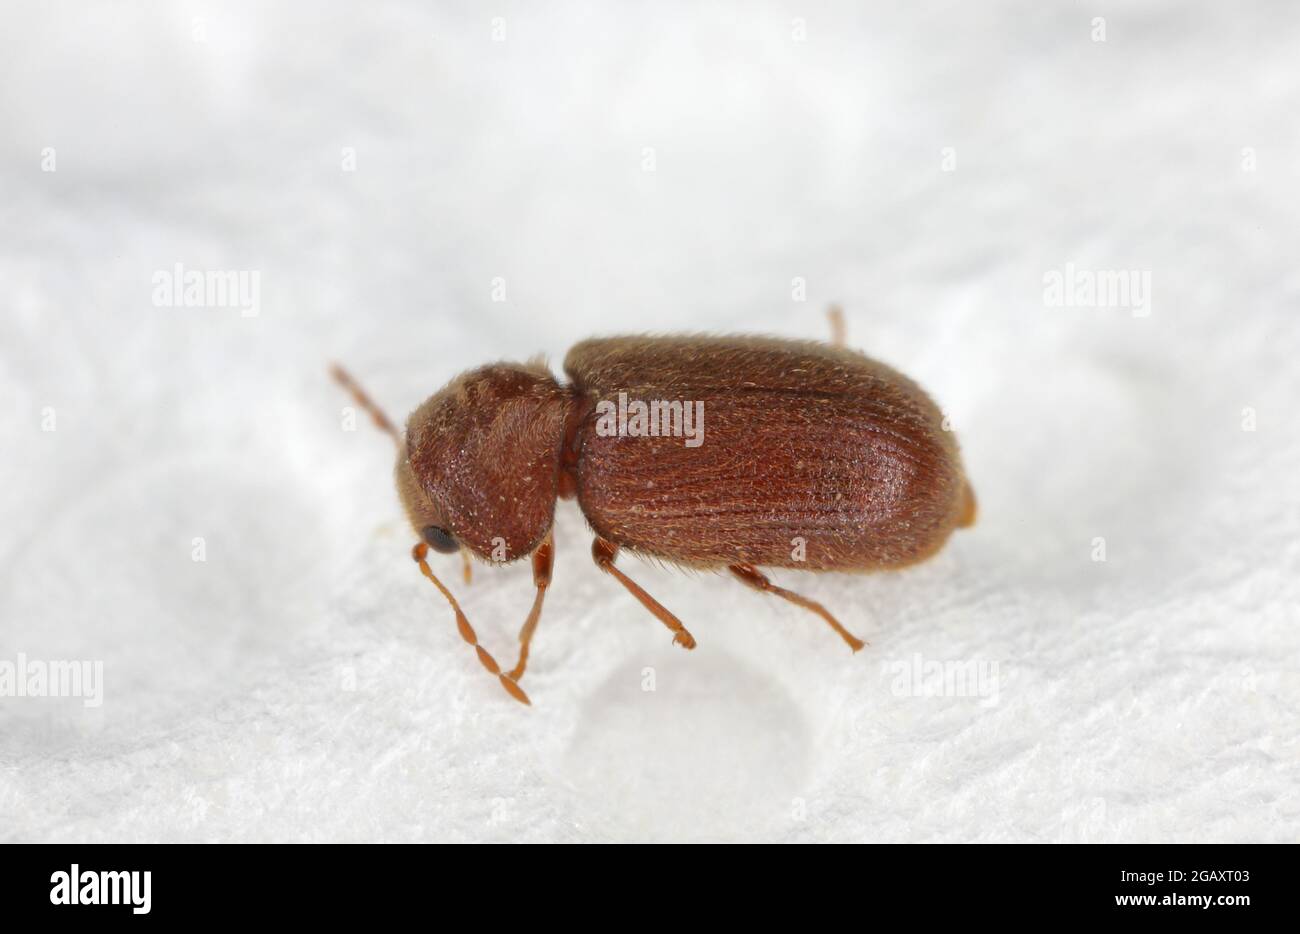 The drugstore beetle (Stegobium paniceum), also known as the bread beetle or biscuit beetle from family Anobiidae. insect on a paper towel. Stock Photo